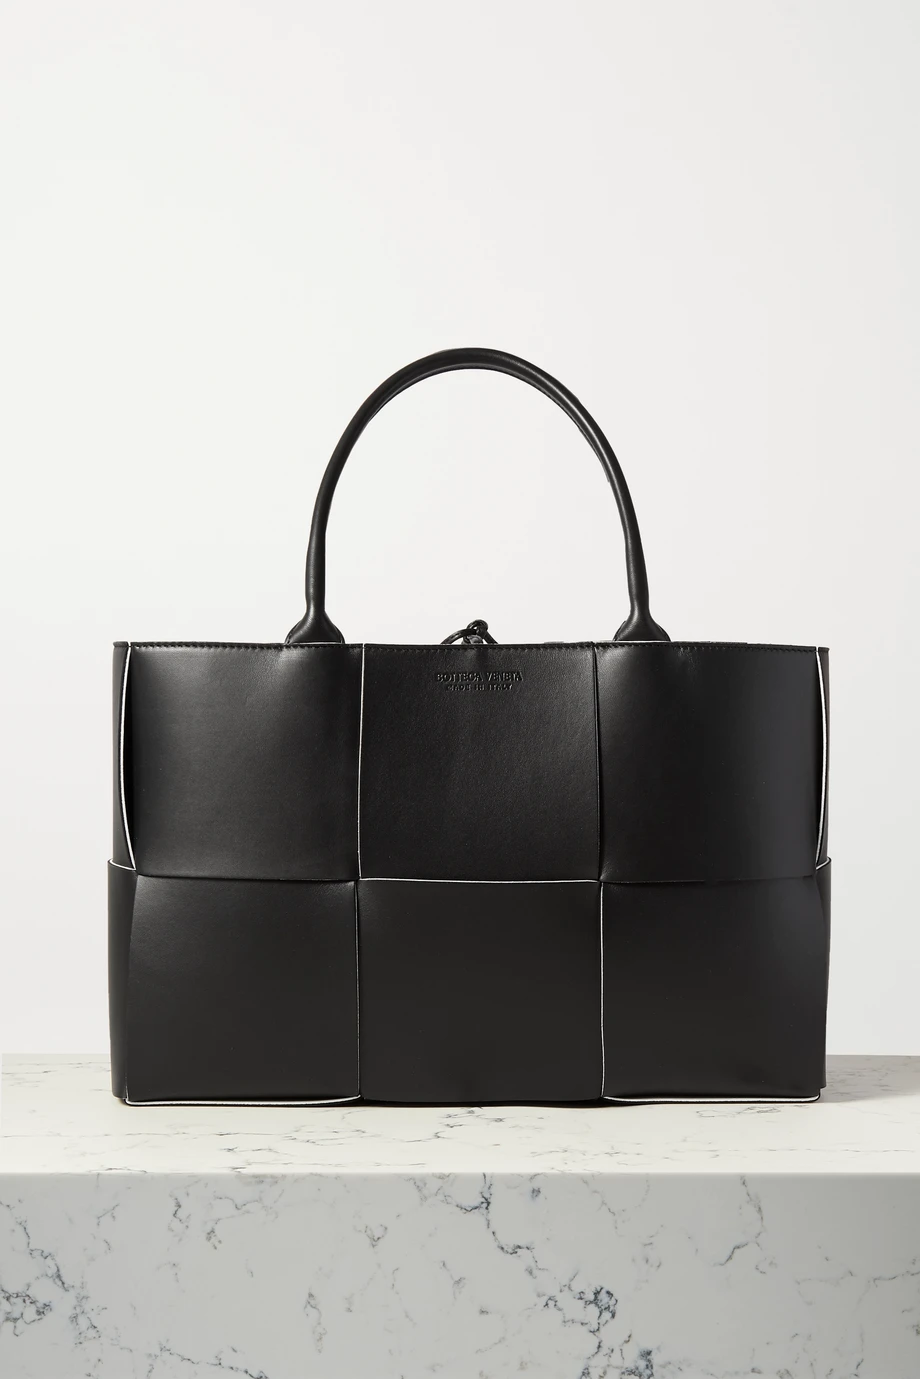 6 Polène bags that are the epitome of quiet luxury